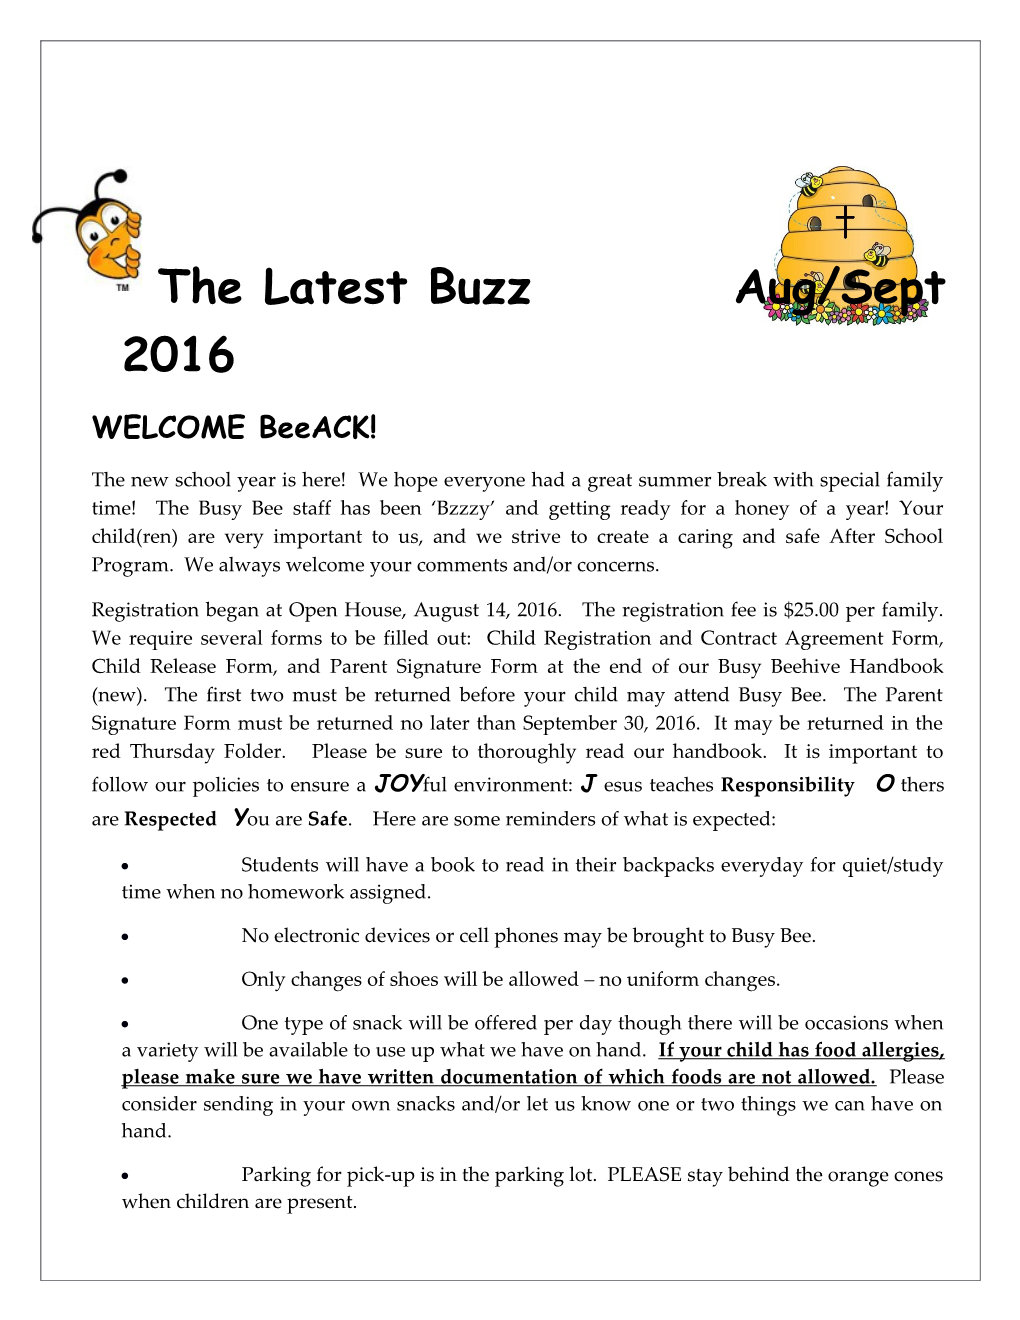 The Latest Buzz